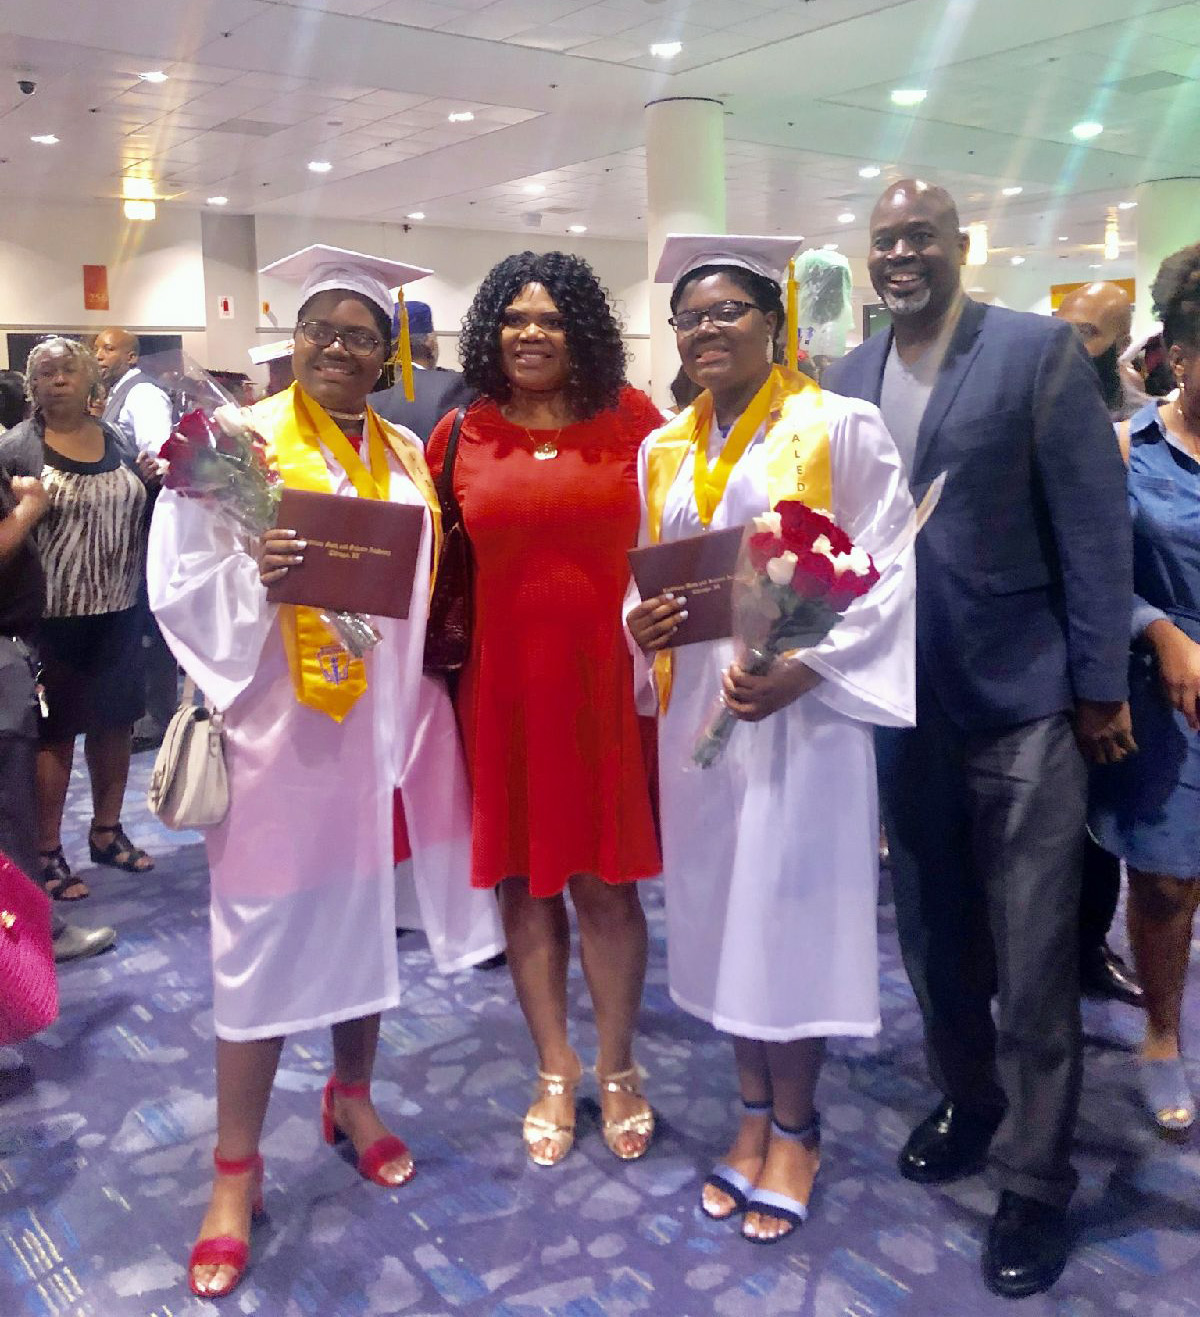 PHOTO: Tyra and Tia Smith, 18, are seen with their parents, Lemi-Ola Erinkitola and Terry Smith Sr. at the Lindblom Math and Science Academy graduation in West Englewood, Ill., on June 8, 2019.